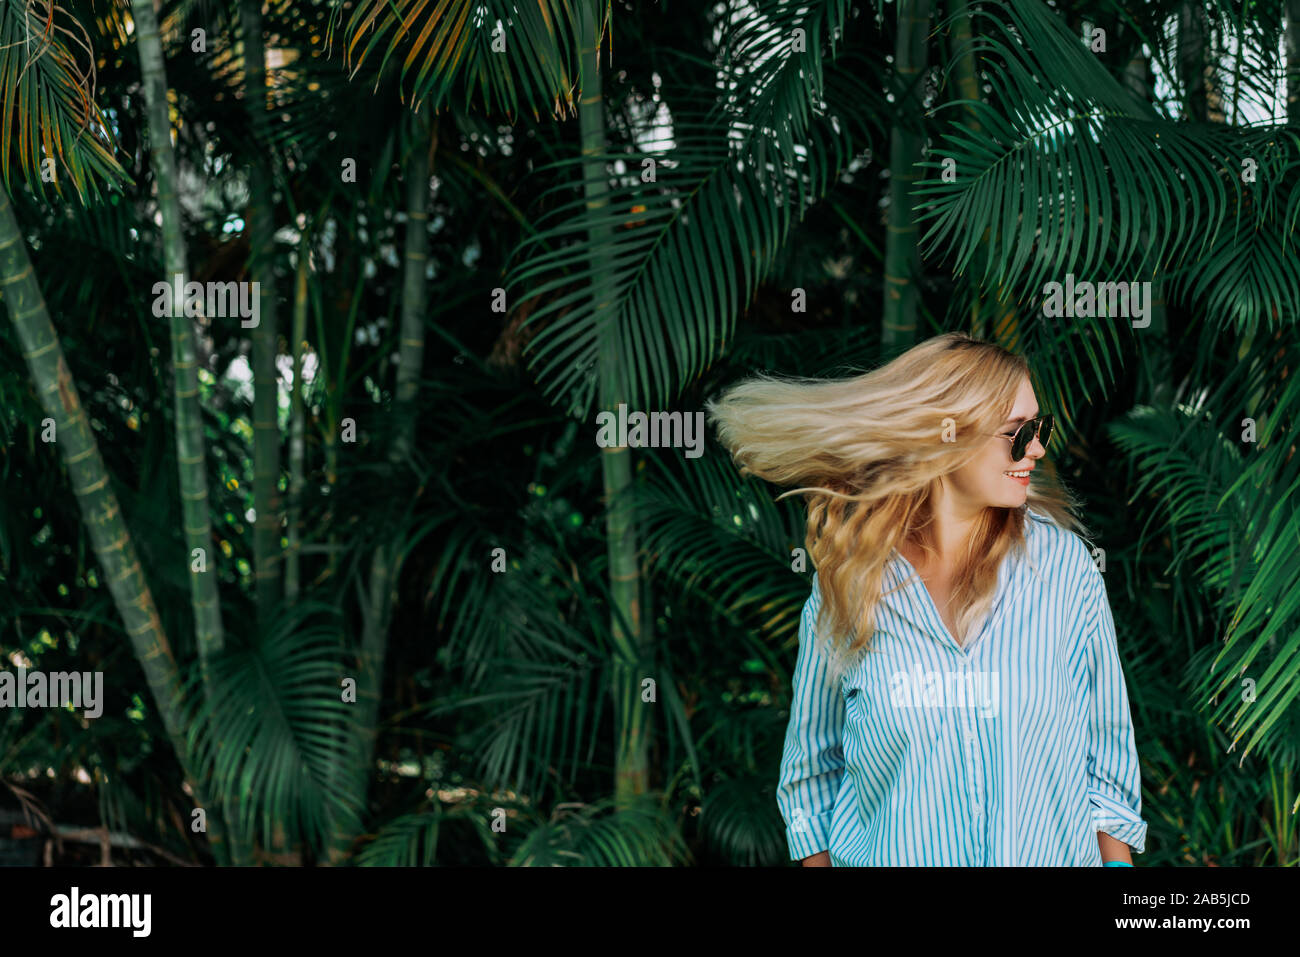 Portrait of beautiful of traveler woman with sunglasses smiling behind palm trees. Sunlight. Concept travel, vacation, dream. Flying hairstyle Stock Photo